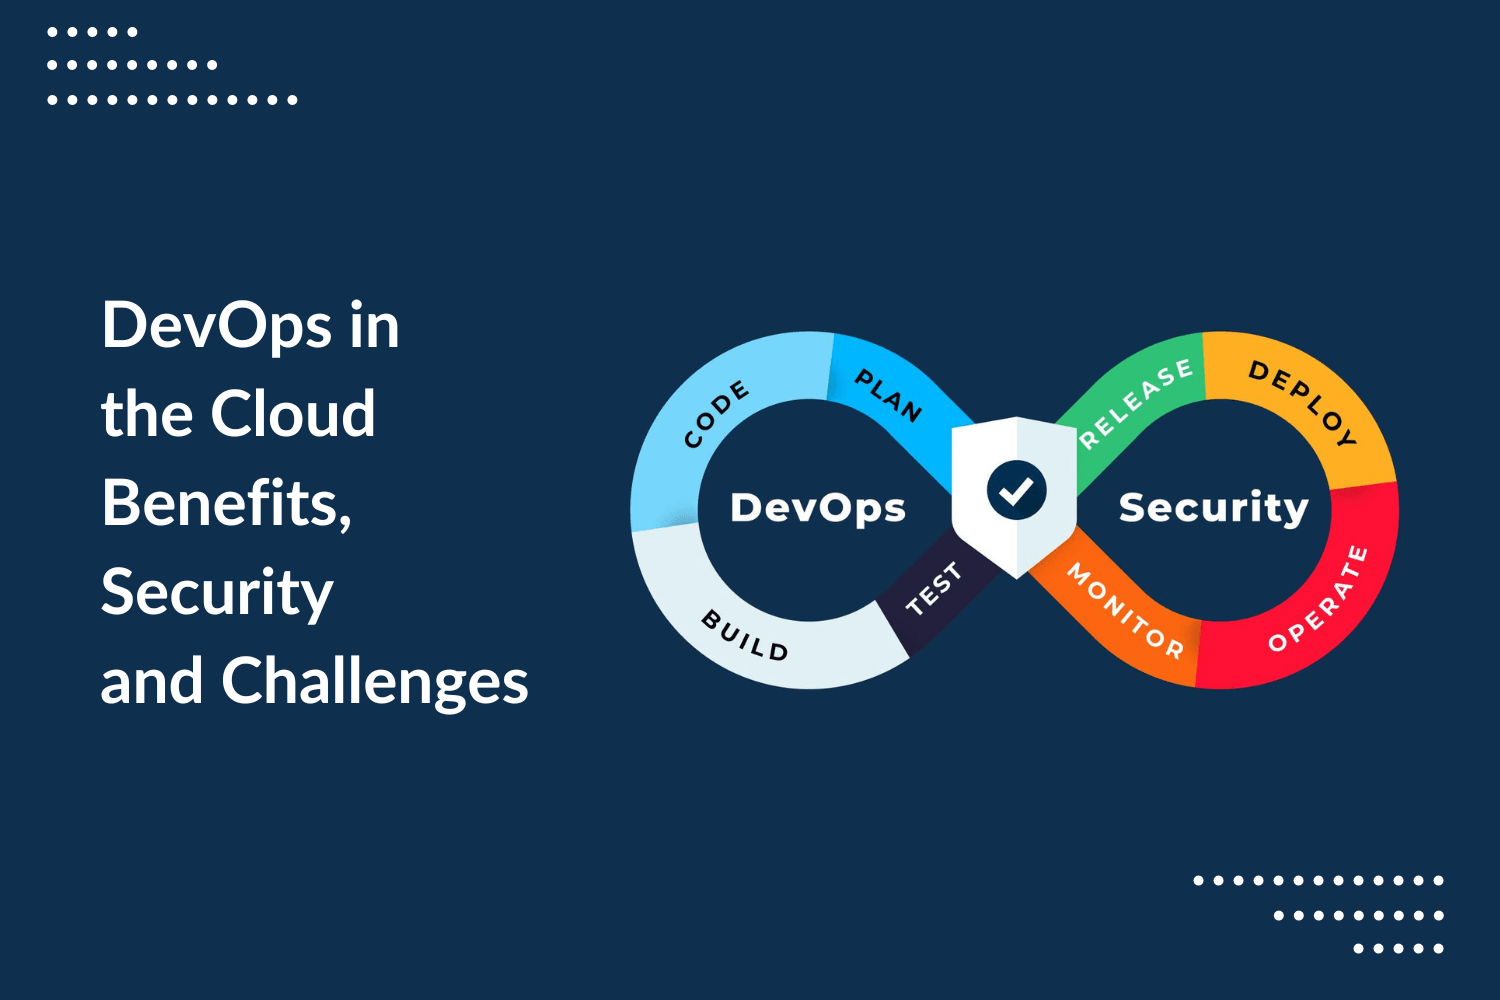 DevOps in the Cloud Benefits, Security and Challenges